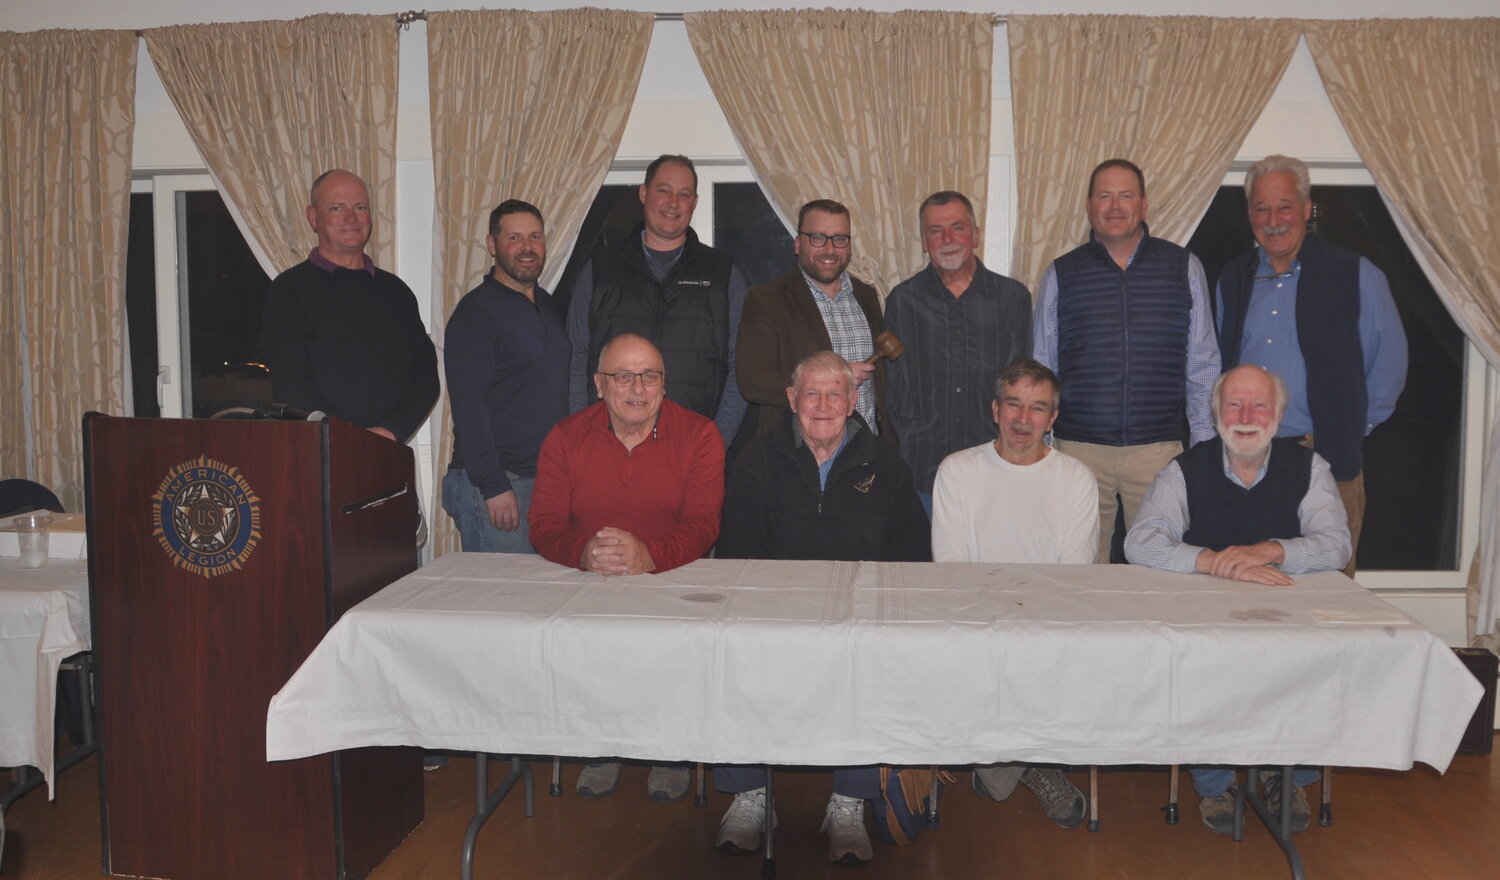 Manchester Club’s Executive Board for the 2022 year–its 117th.Back row picture left to right: Bruce MacDonald Jr., Mark McCoy, Kevin Delaney, Eric Aldrich, Steve Stasiak, Jeff Gilson and Chuck Filias. Seated left to right: Alan Kirker, Craige McCoy, Bruce Heisey and Bill Scott. Not pictured: Tim Brown and Ken Davis.